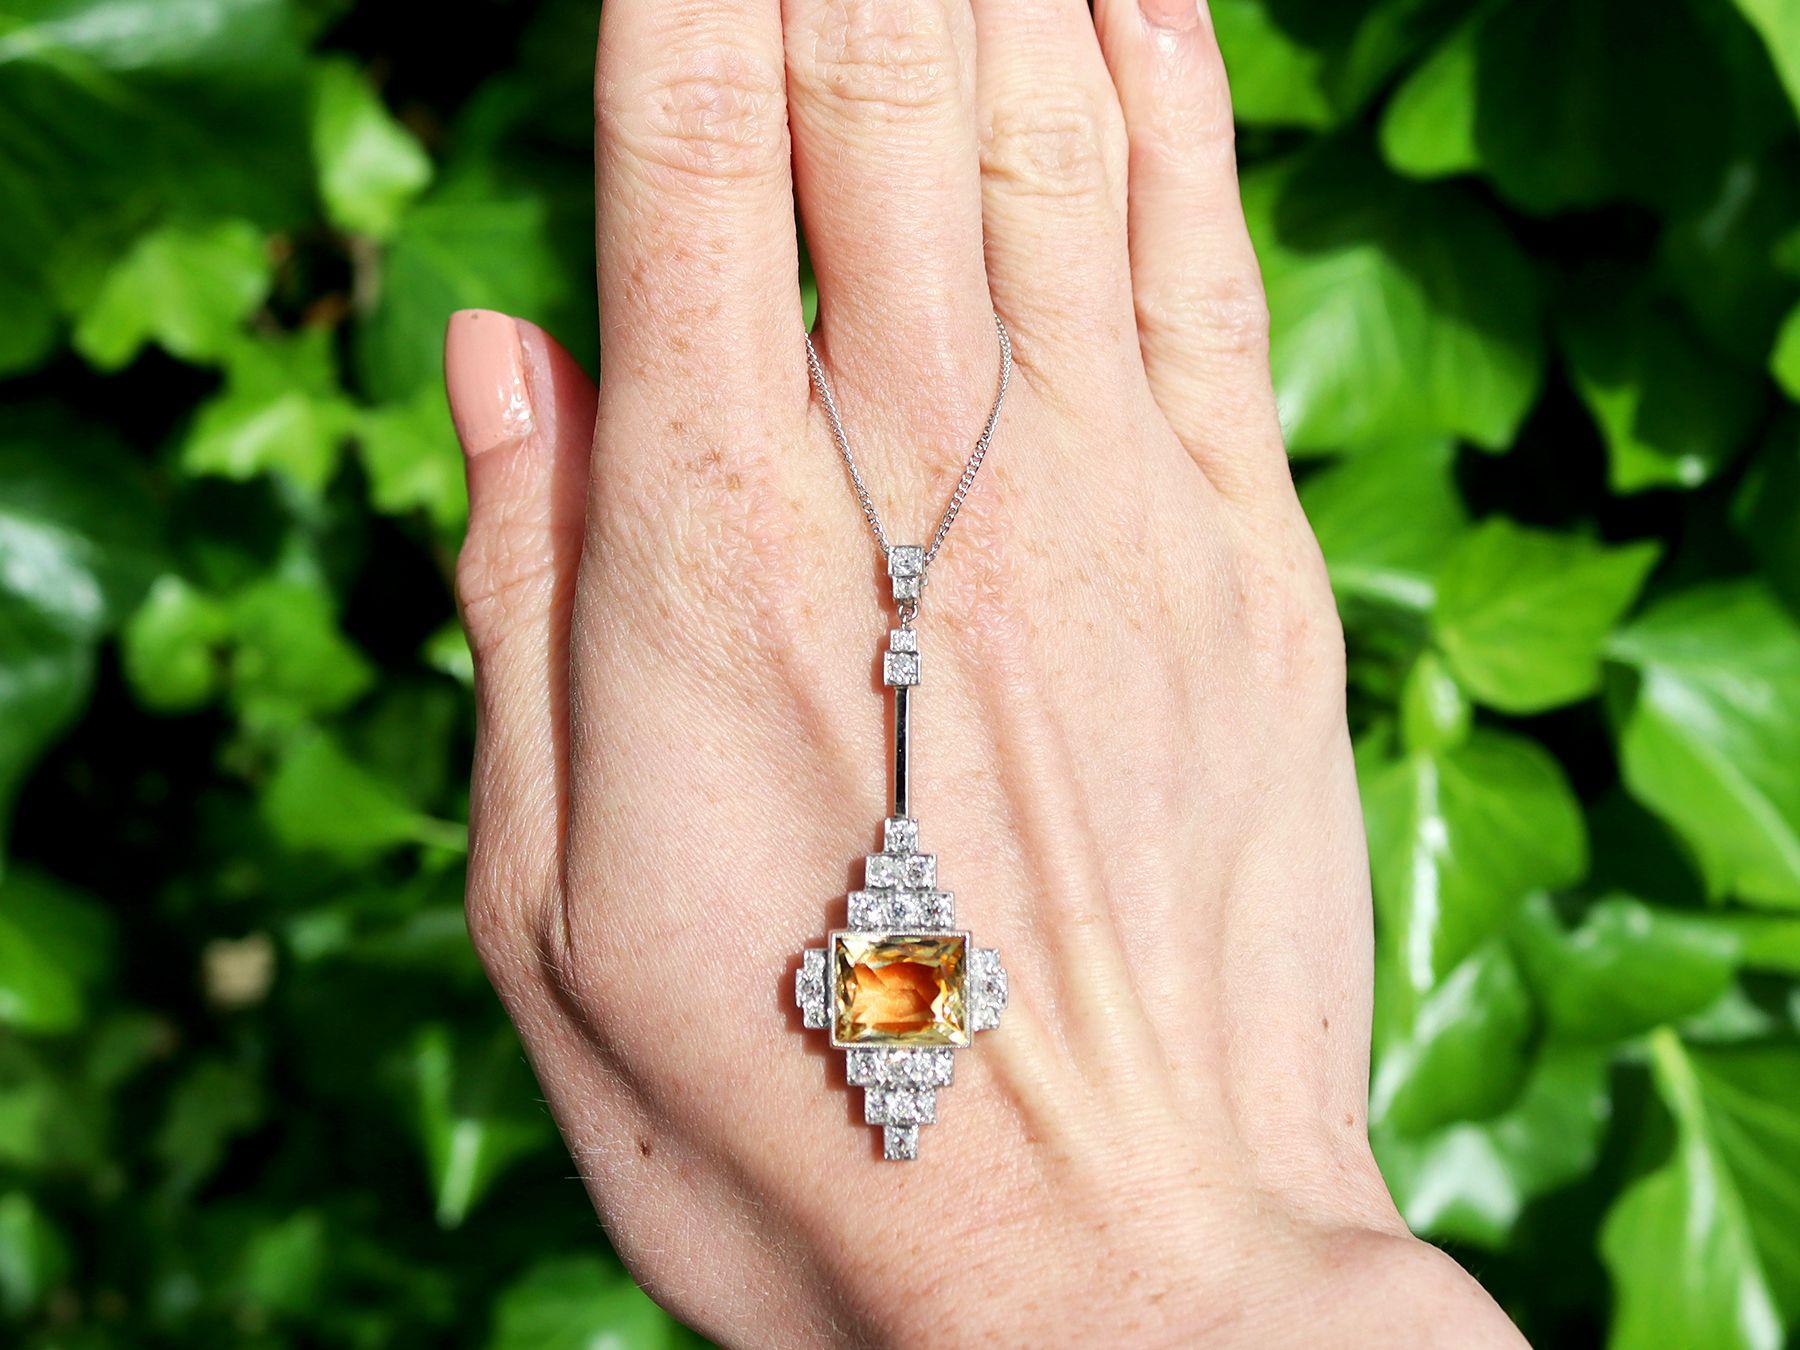 A stunning, fine and impressive 4.20 carat citrine and 0.70 carat diamond, 18ct white gold and platinum Art Deco drop pendant; part of our diverse antique jewellery and estate jewelry collections

This stunning, fine and impressive antique pendant